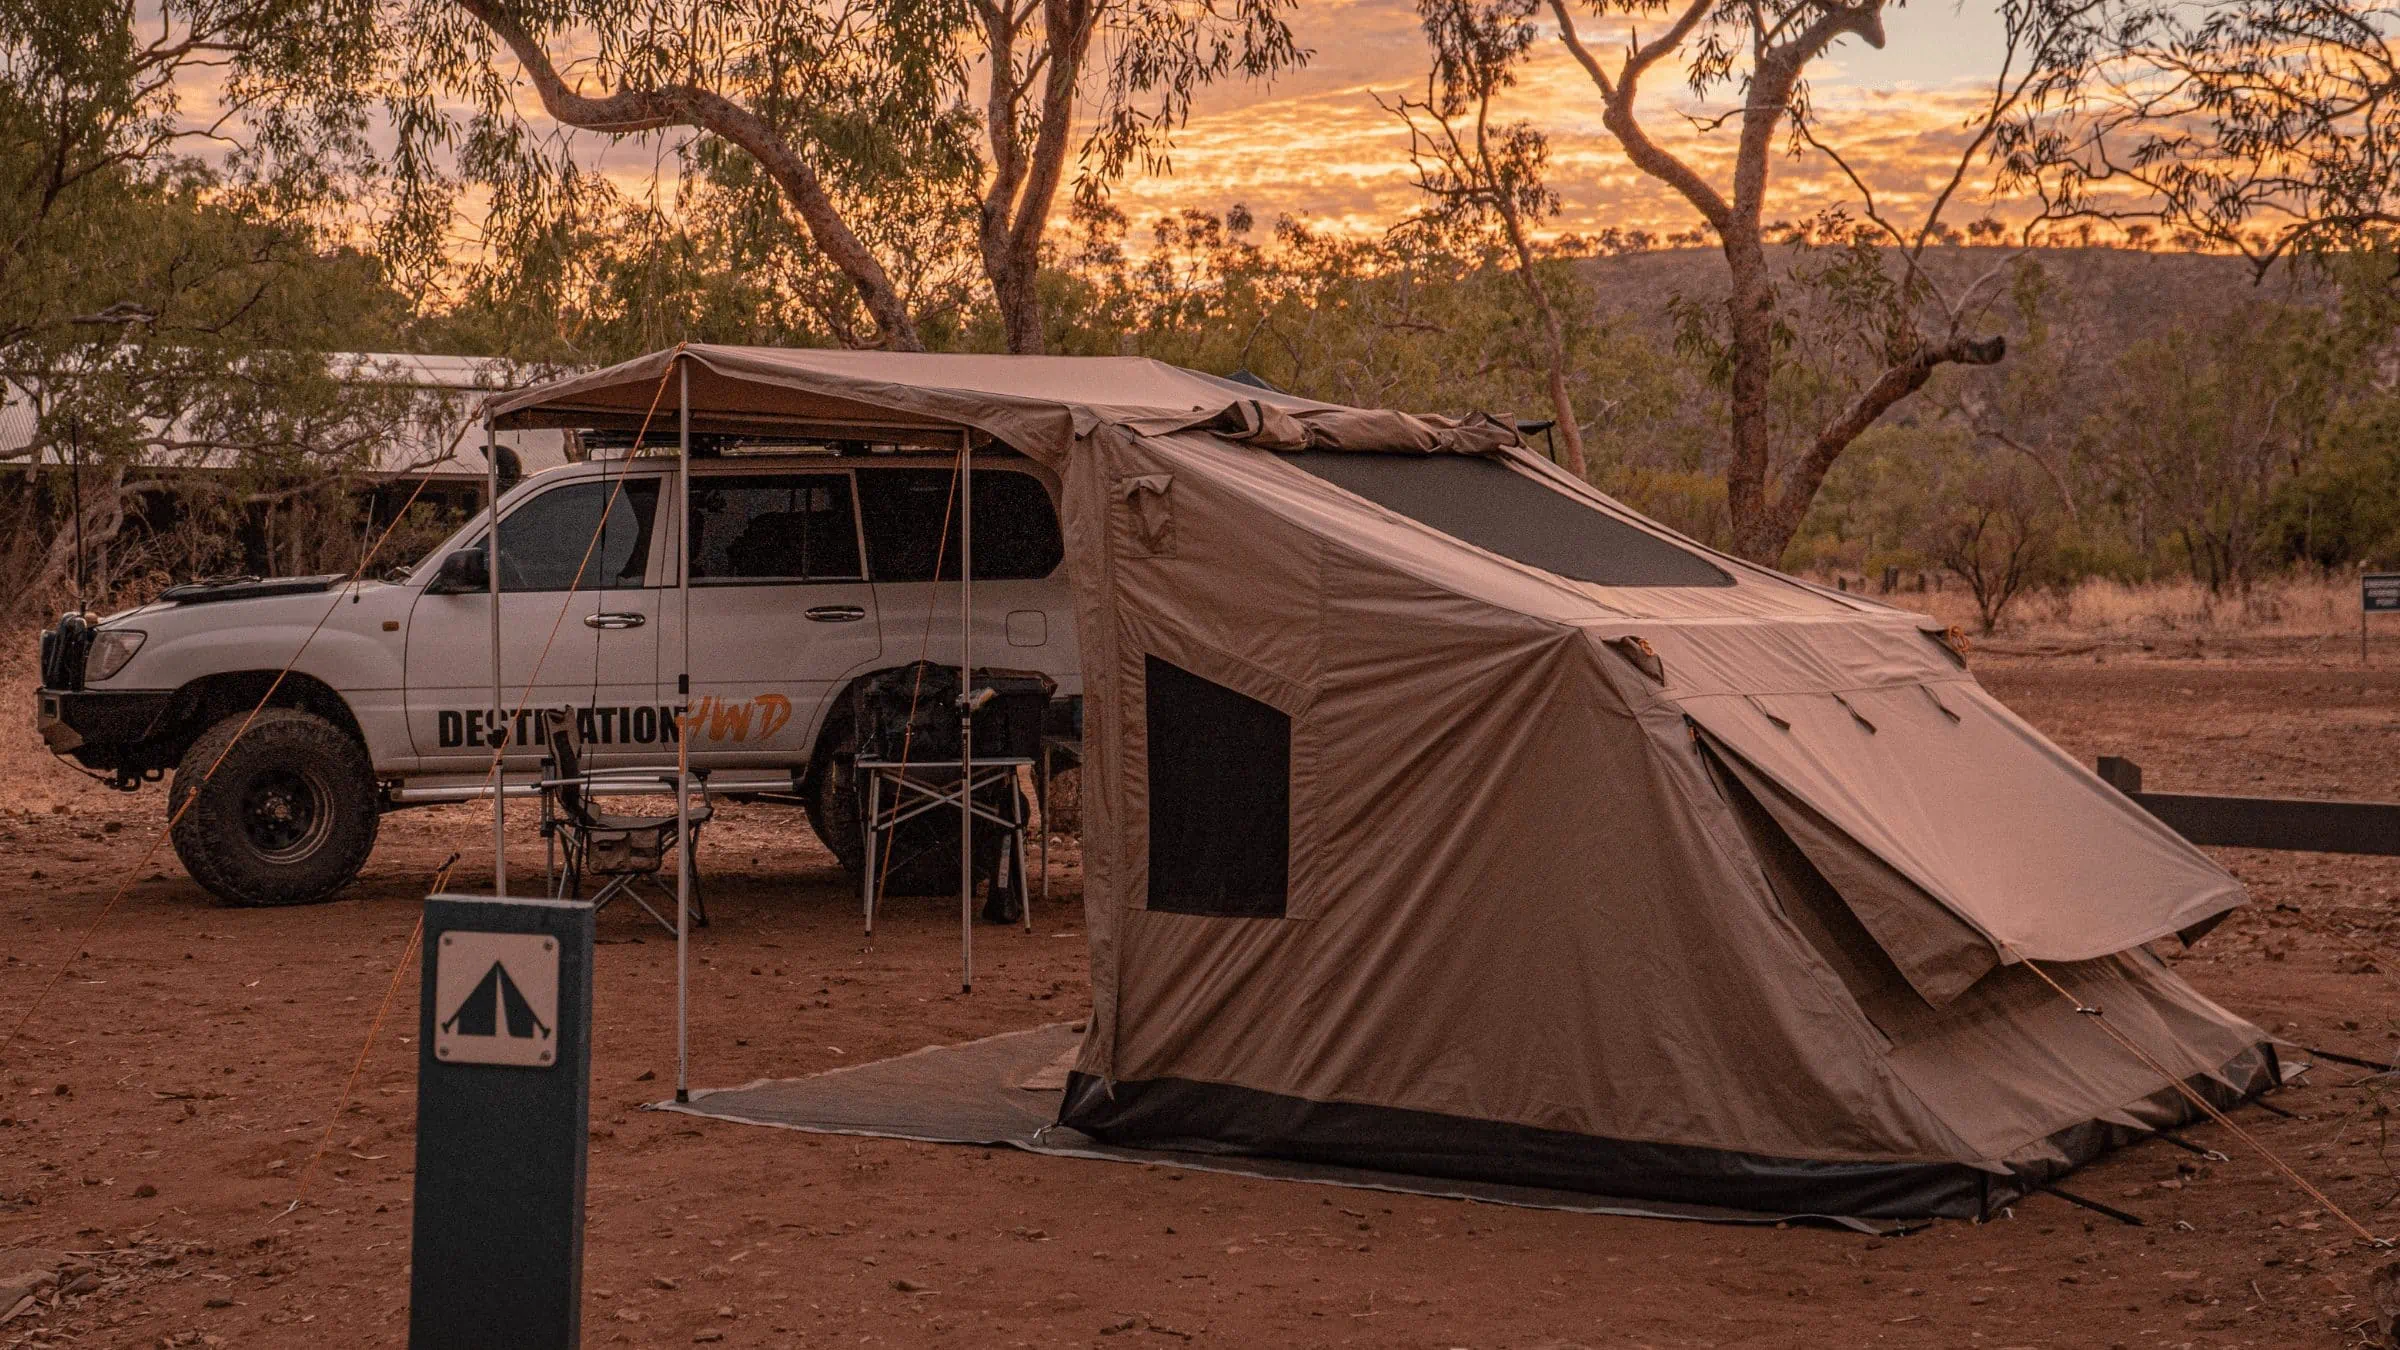 Destination4WD awnings to extend your shade in Australia, Lawn Hill Gorge North Western Qld